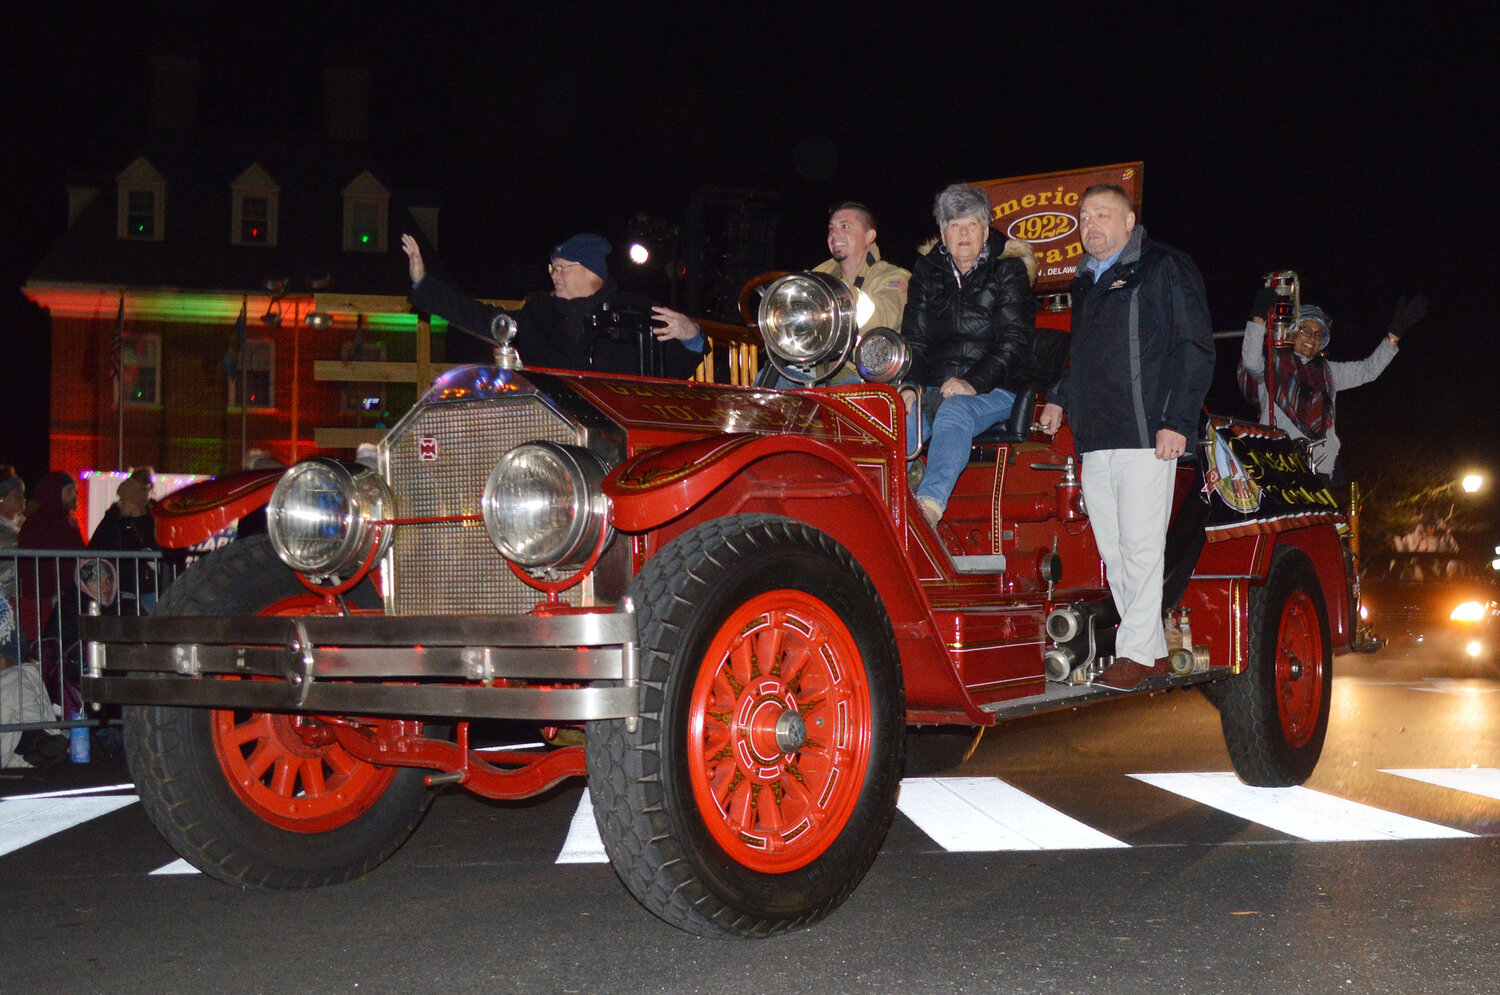 Members of the Georgetown Fire Co. ride a 1922 American LaFrance firetruck in the Georgetown Christmas Parade on Thursday.